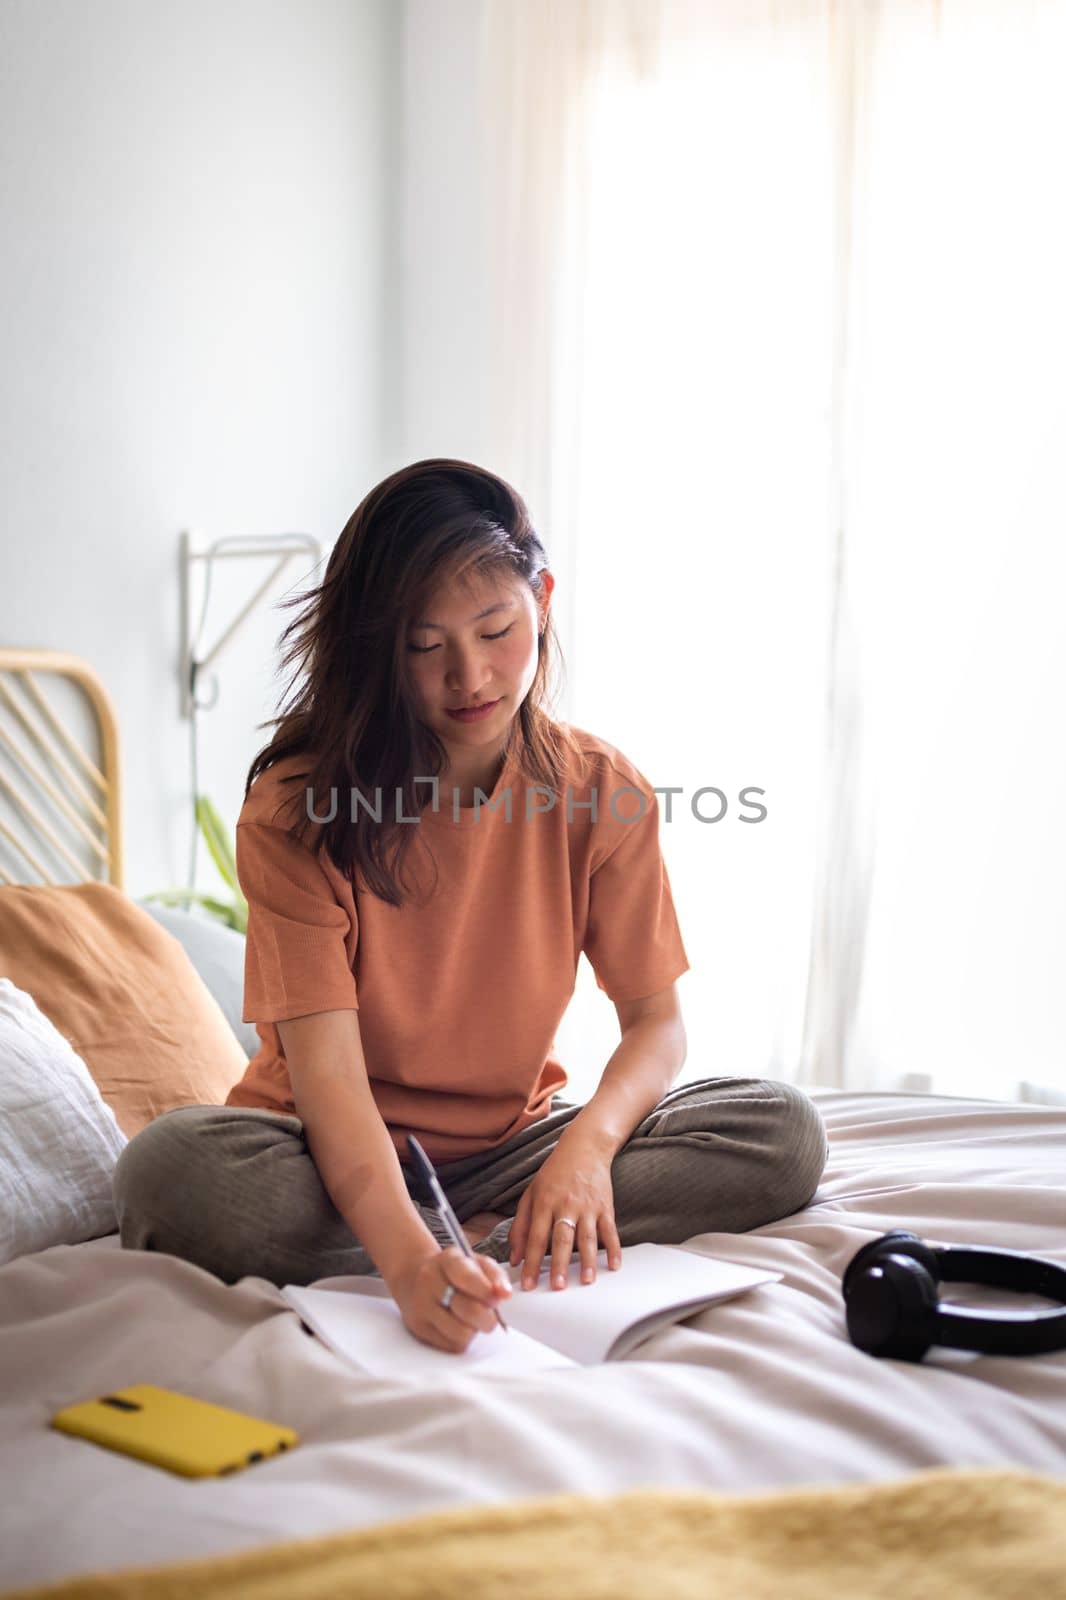 Asian female teen college student sitting on bed writing on journal in cozy bedroom. Copy space. Vertical image. Lifestyle concept.